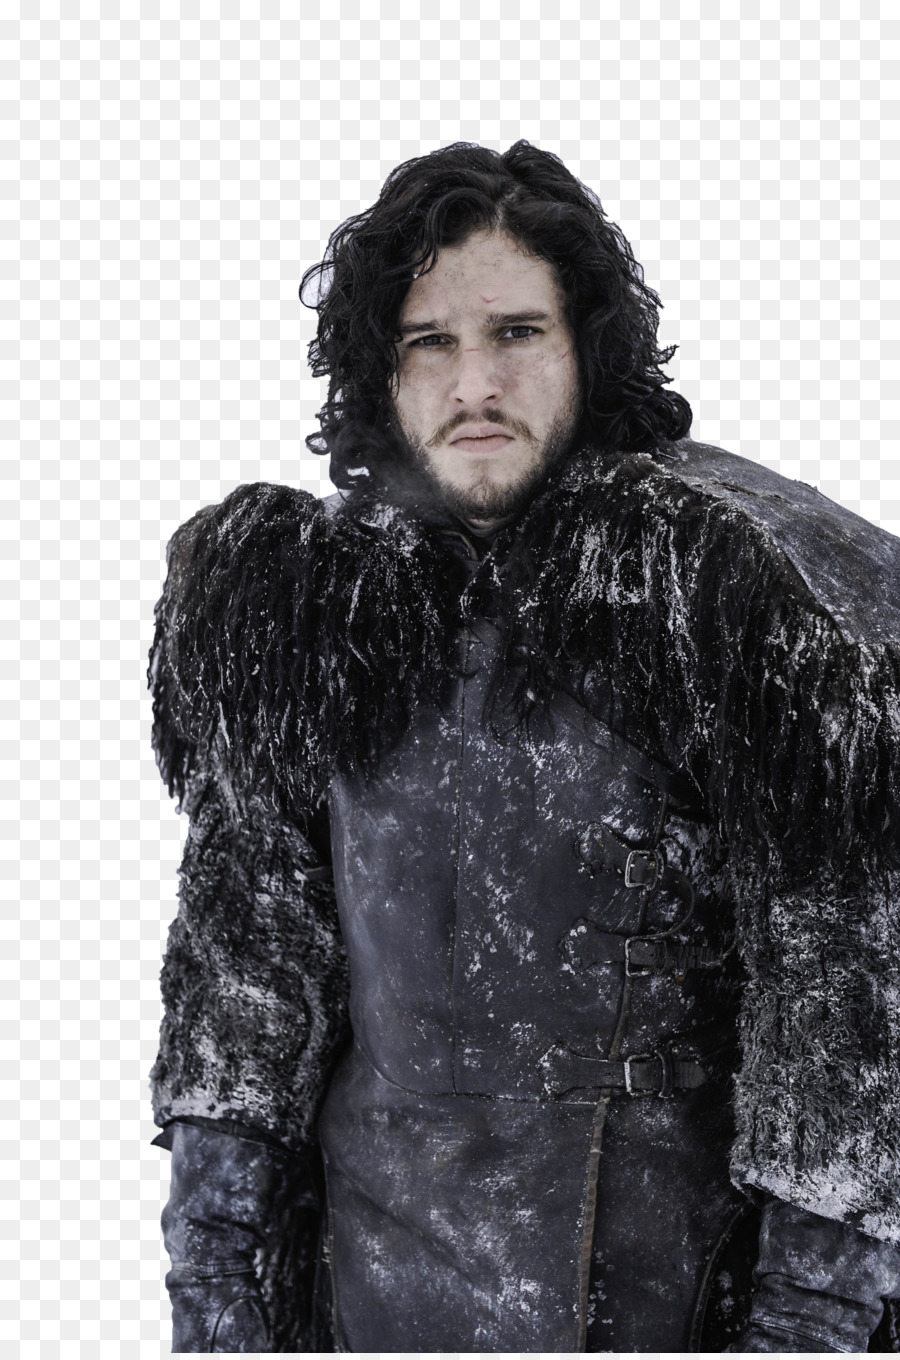 Jon Snow Kit Harington Game of Thrones Tyrion Lannister Brienne of Tarth - Game of Thrones png download - 2832*4256 - Free Transparent Jon Snow png Download.